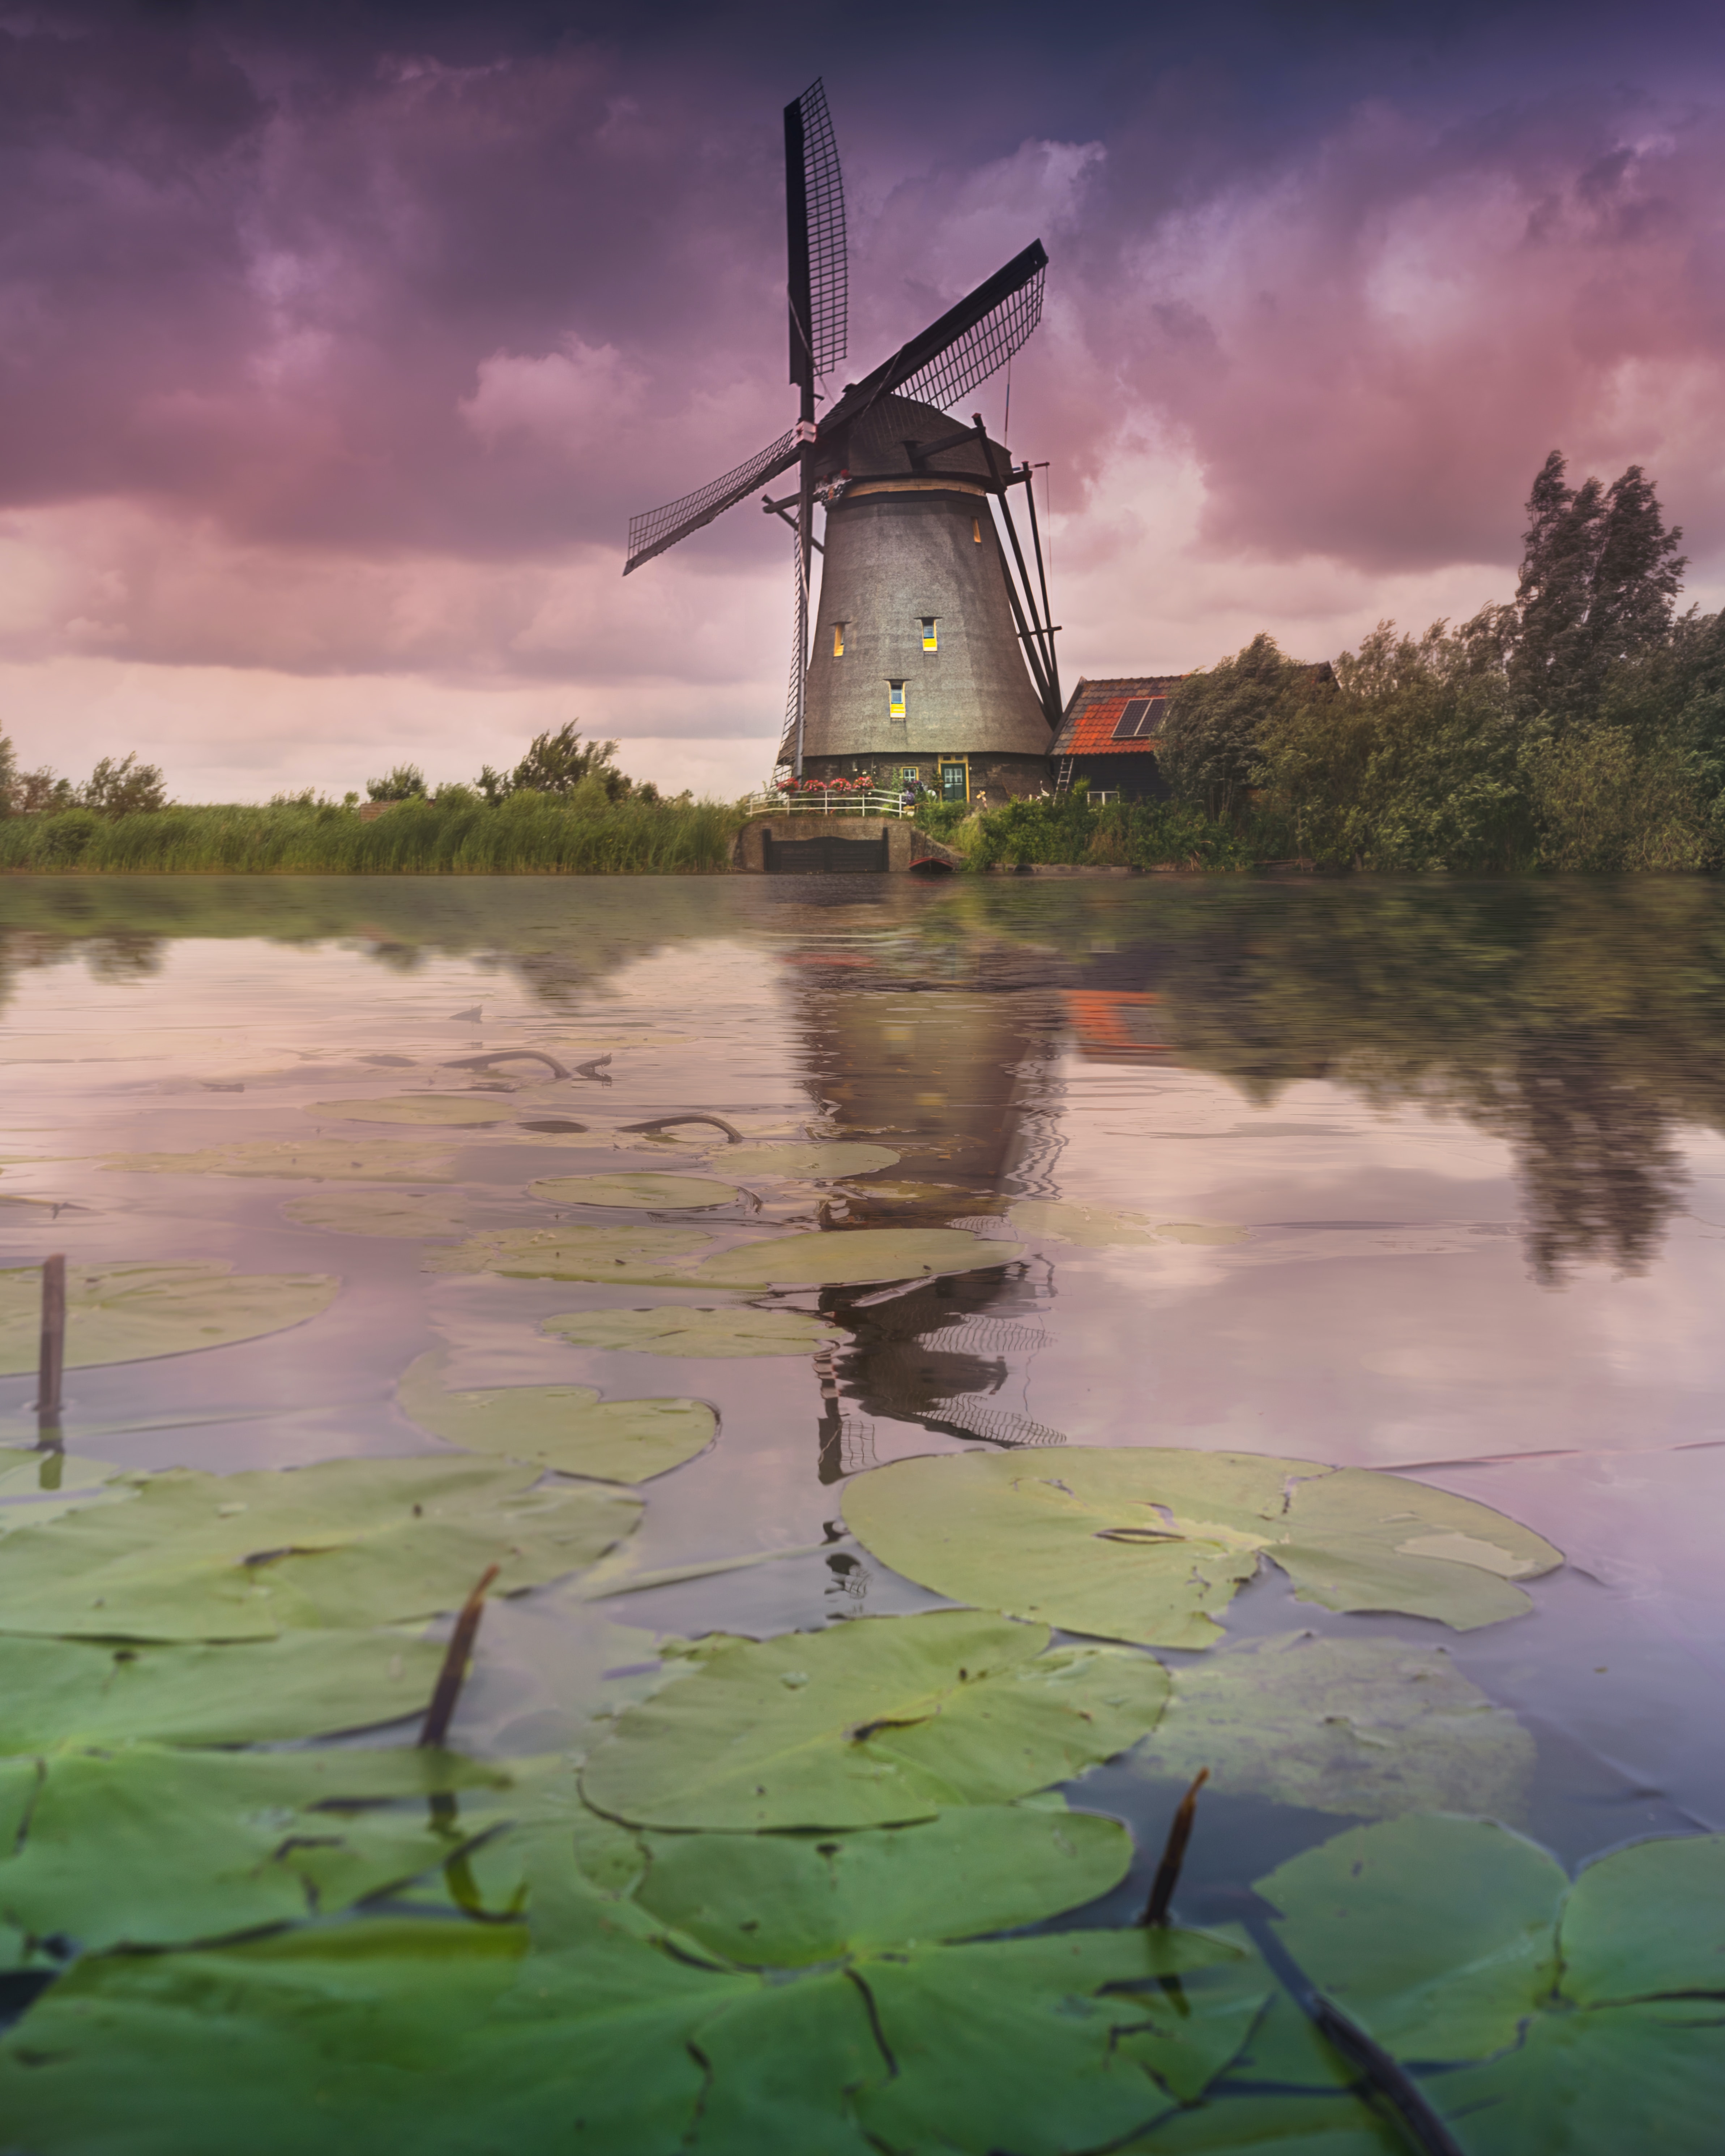 Check Out the Windmills of Kinderdijk